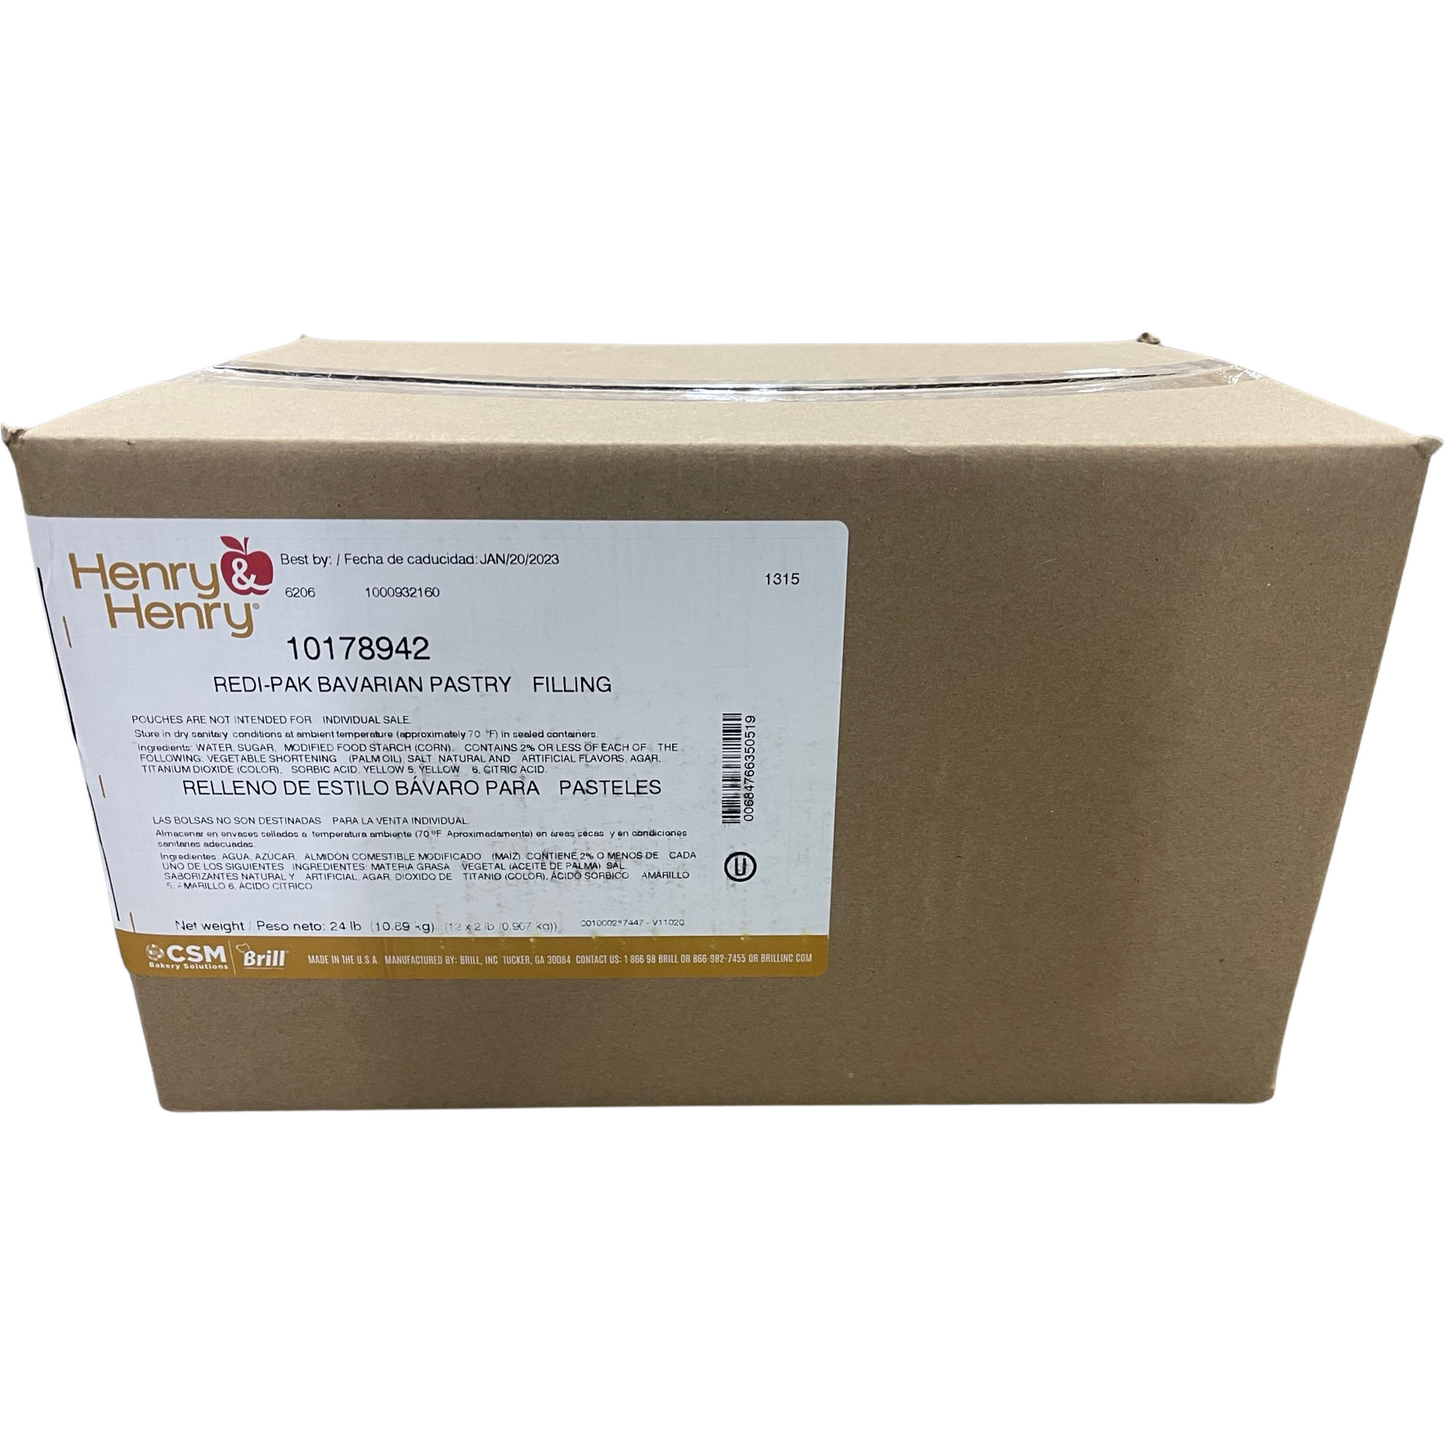 [CASE] Henry & Henry Bavarian Pastry Filling 12 X 2lbs